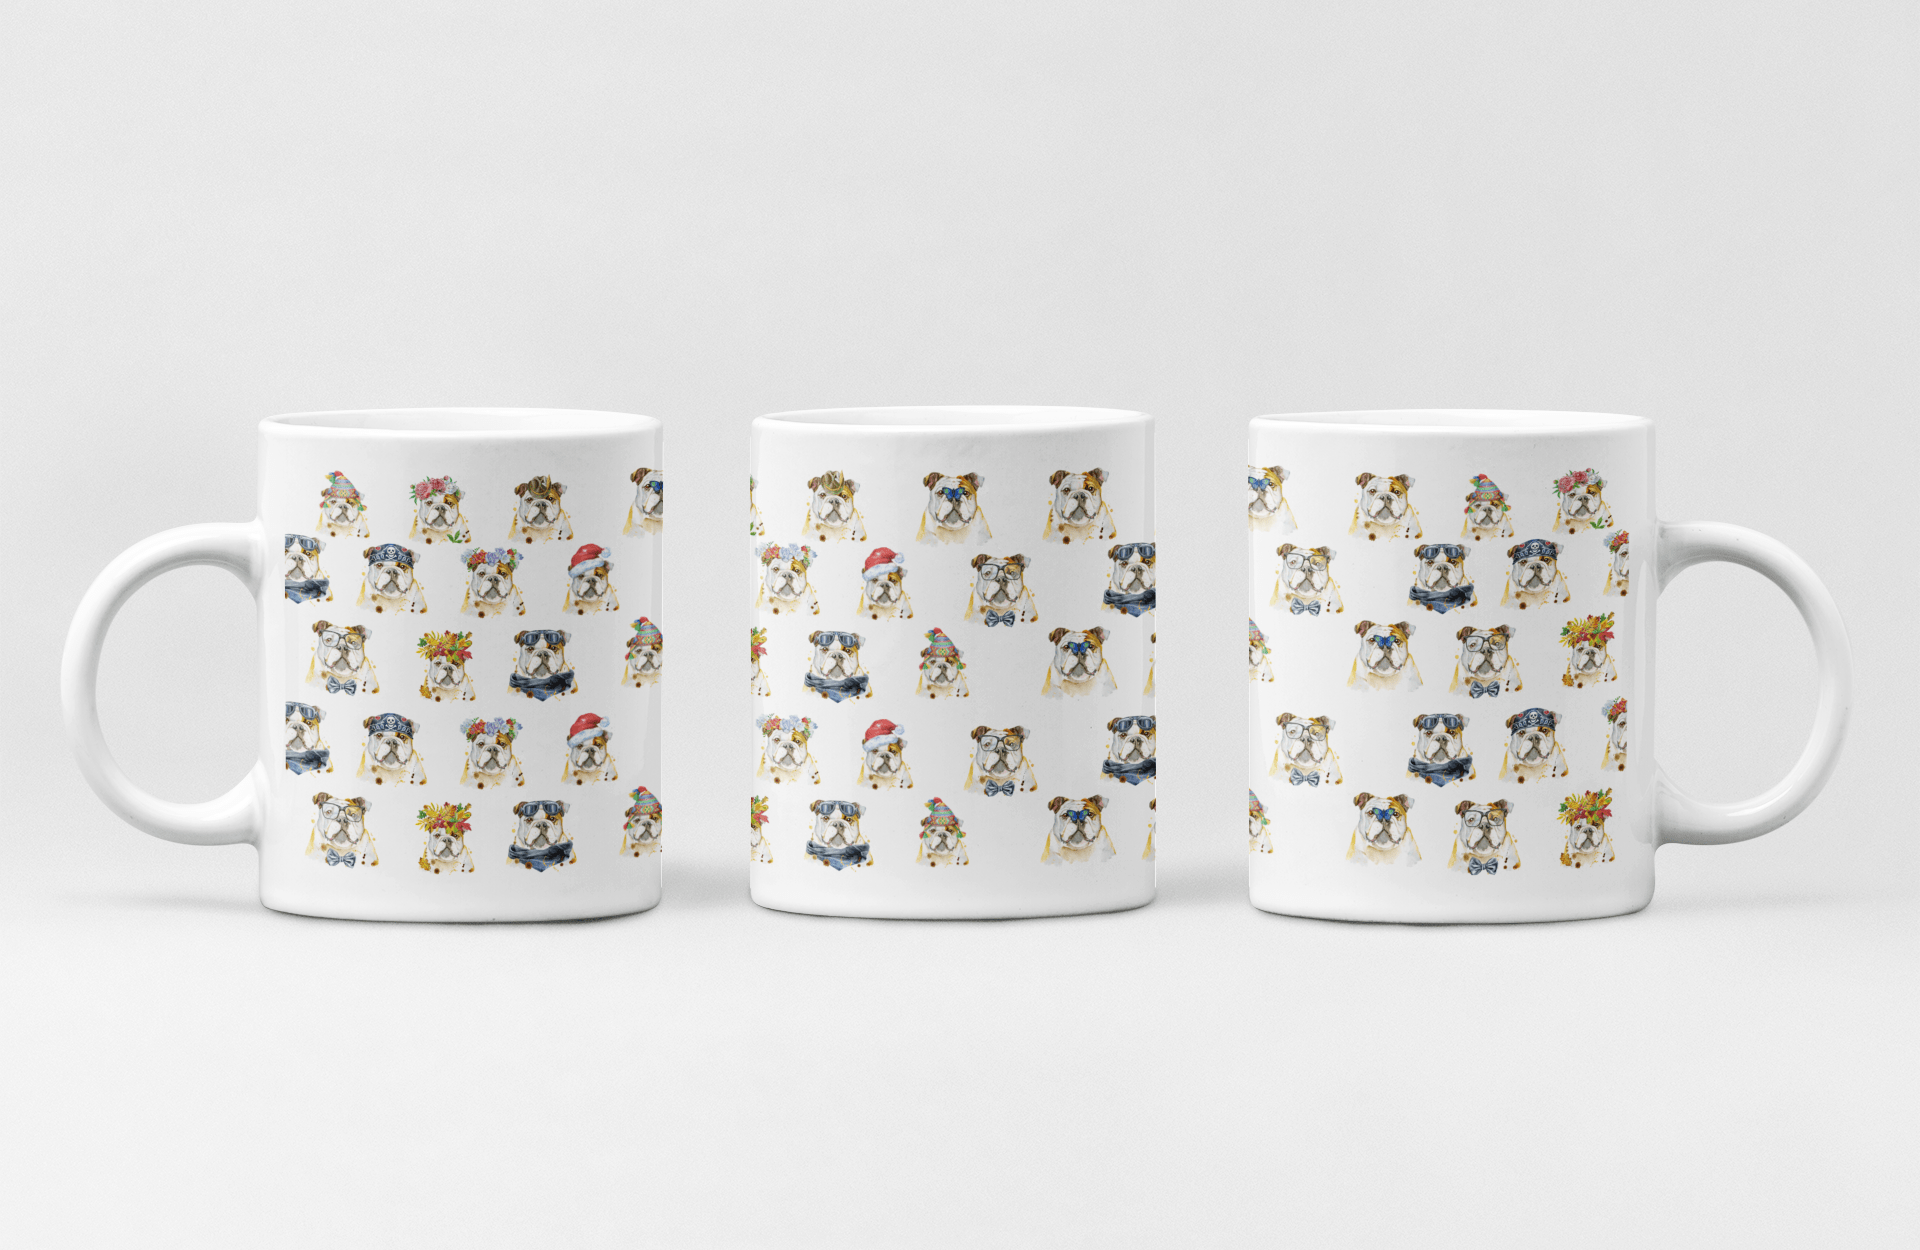 mockup-of-an-11-oz-coffee-mug-from-three-different-angles-27883.png